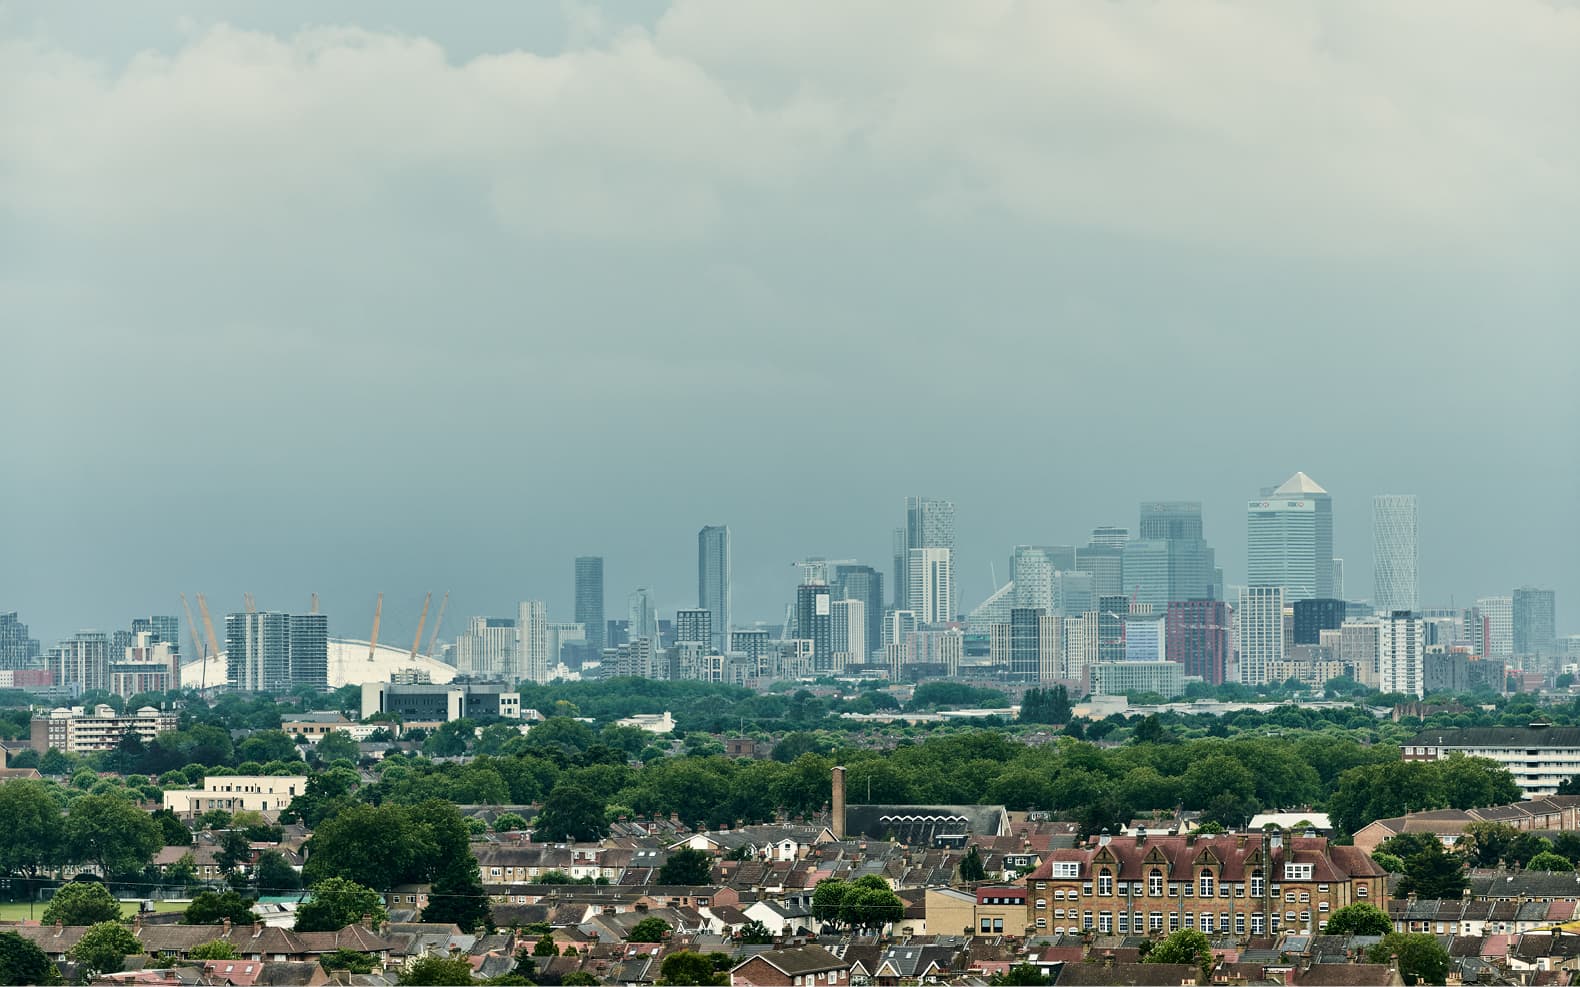 view of The City of London from balcony